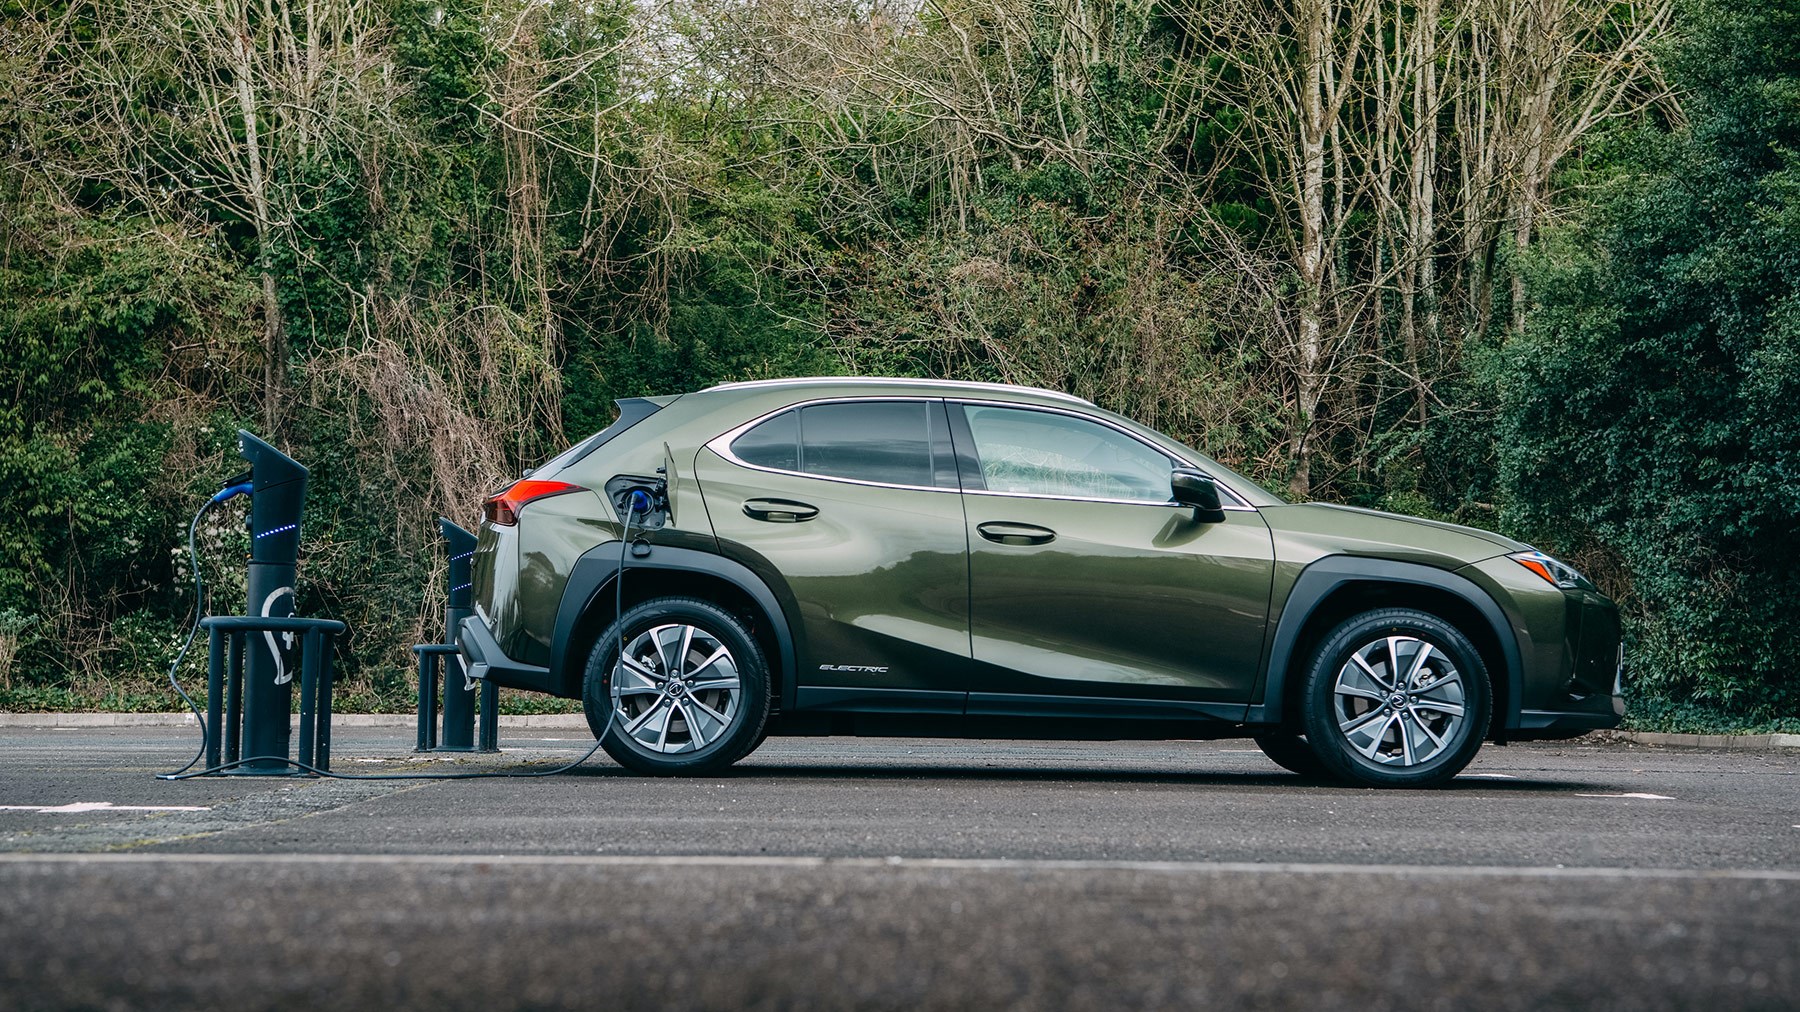 Lexus UX300e: charging the electric SUV